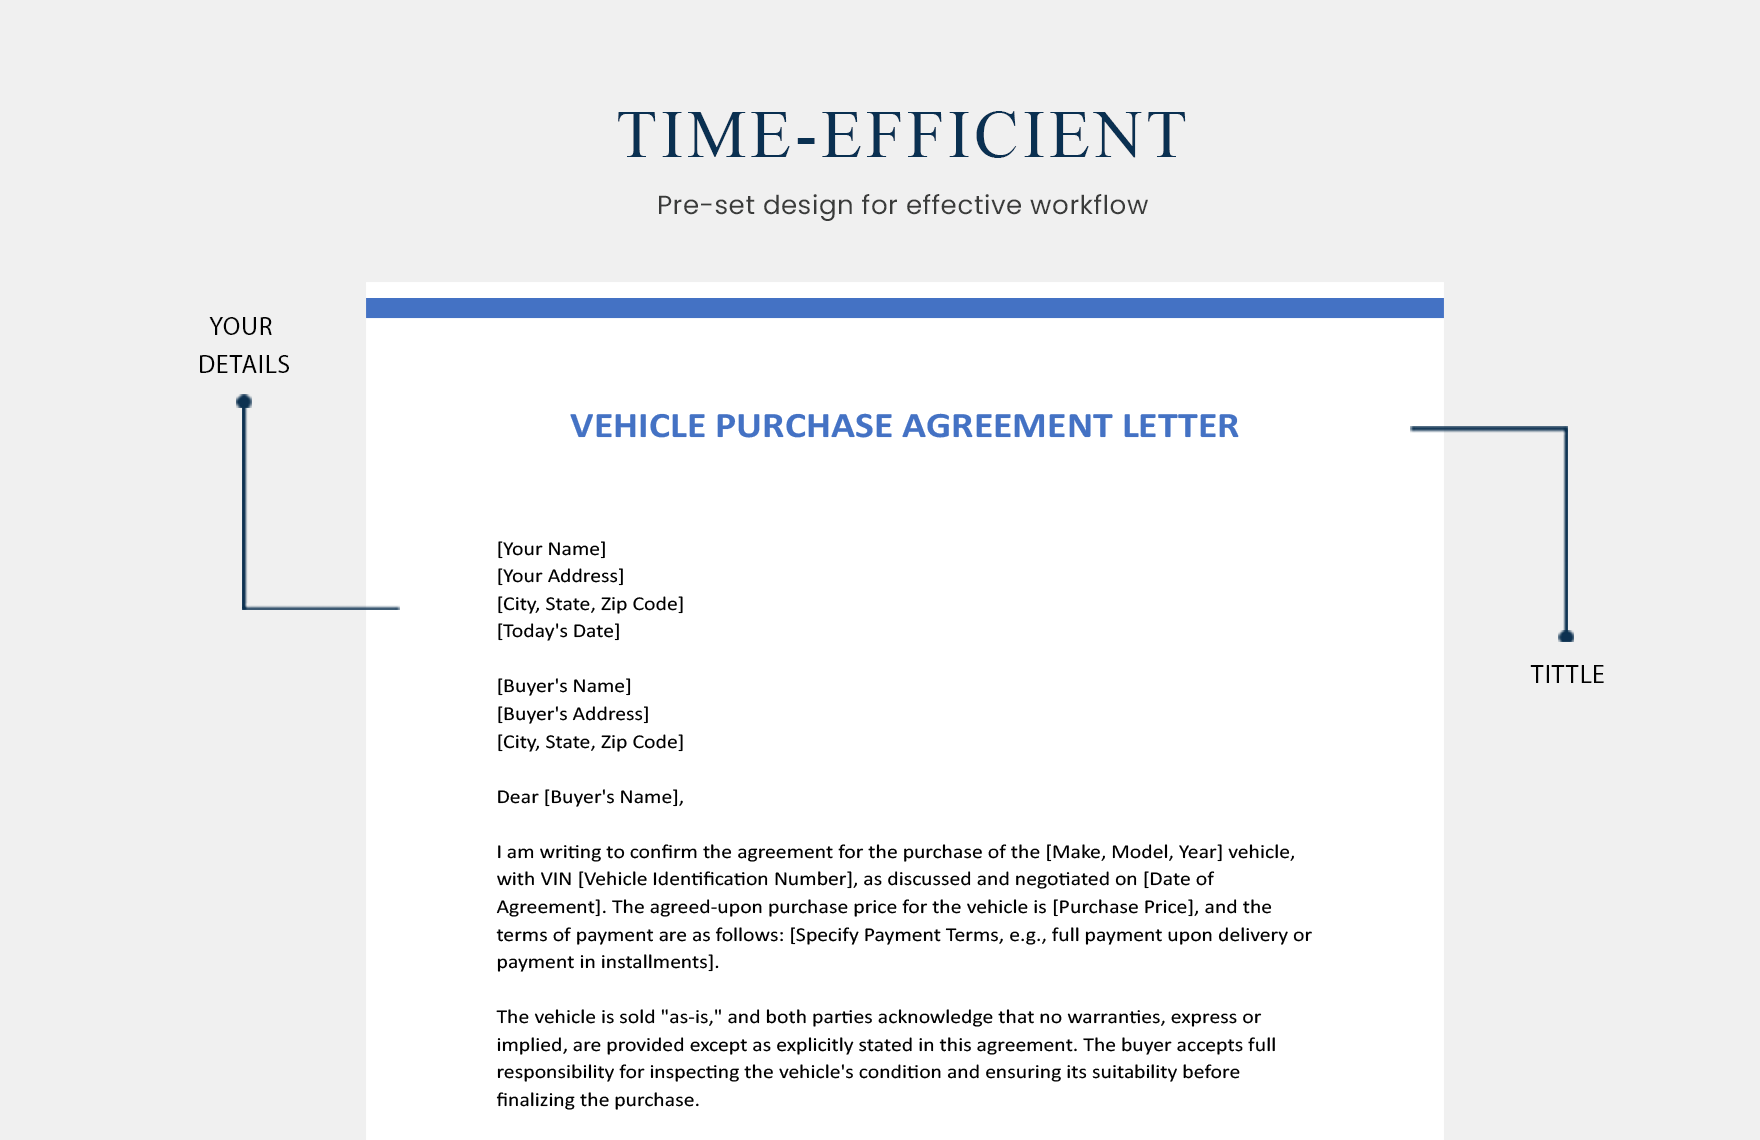 Vehicle Purchase Agreement Letter